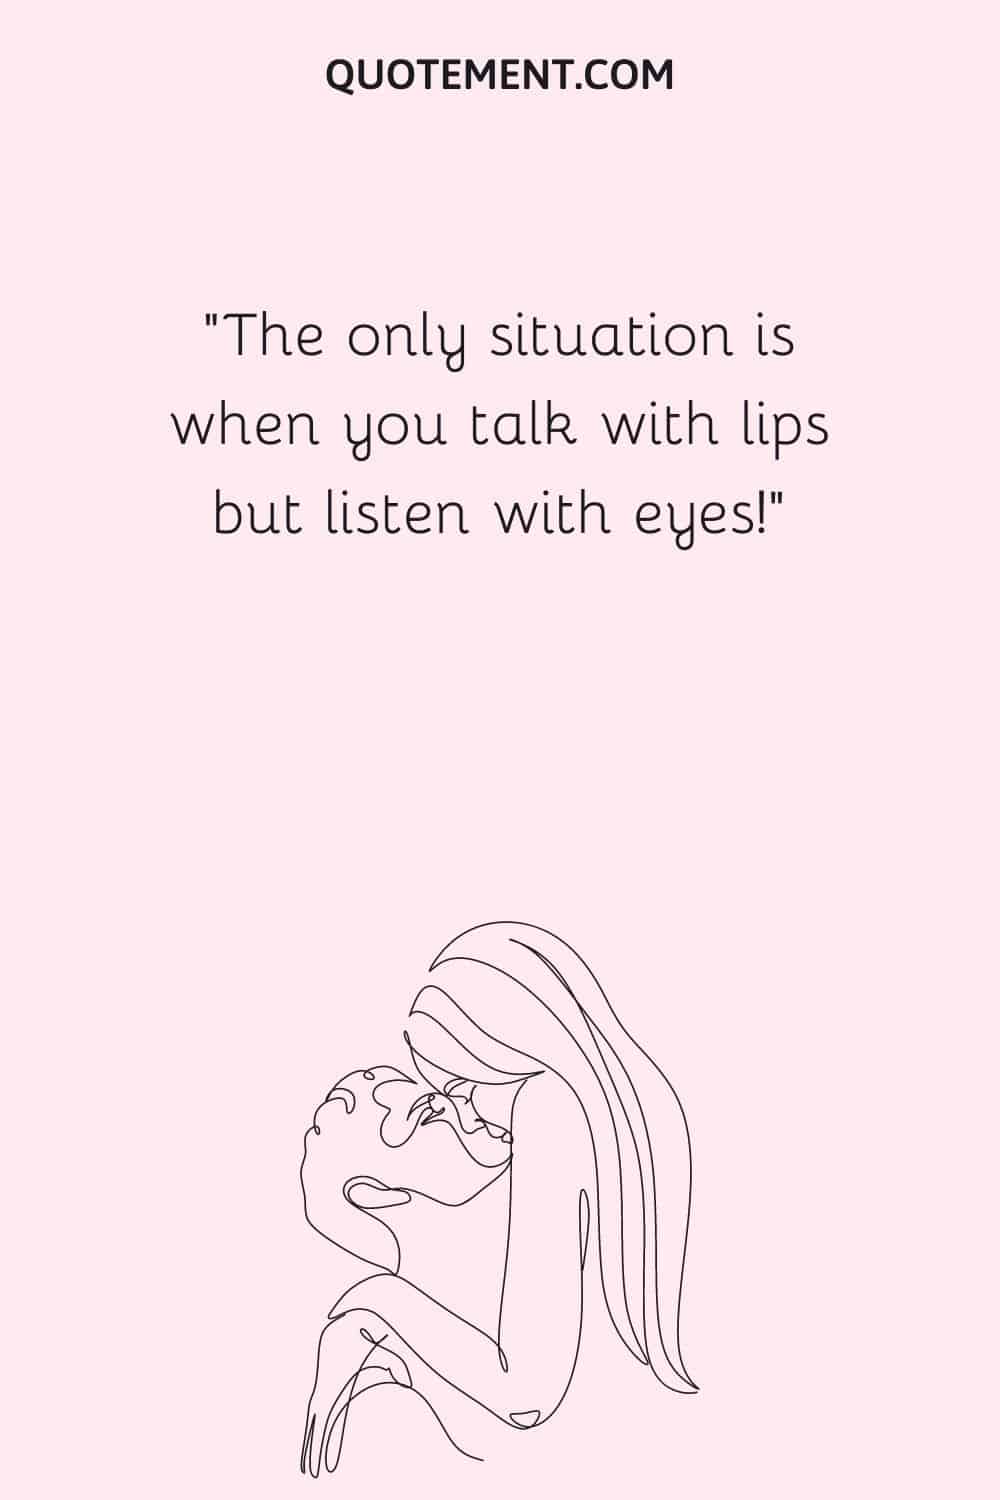 The only situation is when you talk with lips but listen with eyes!